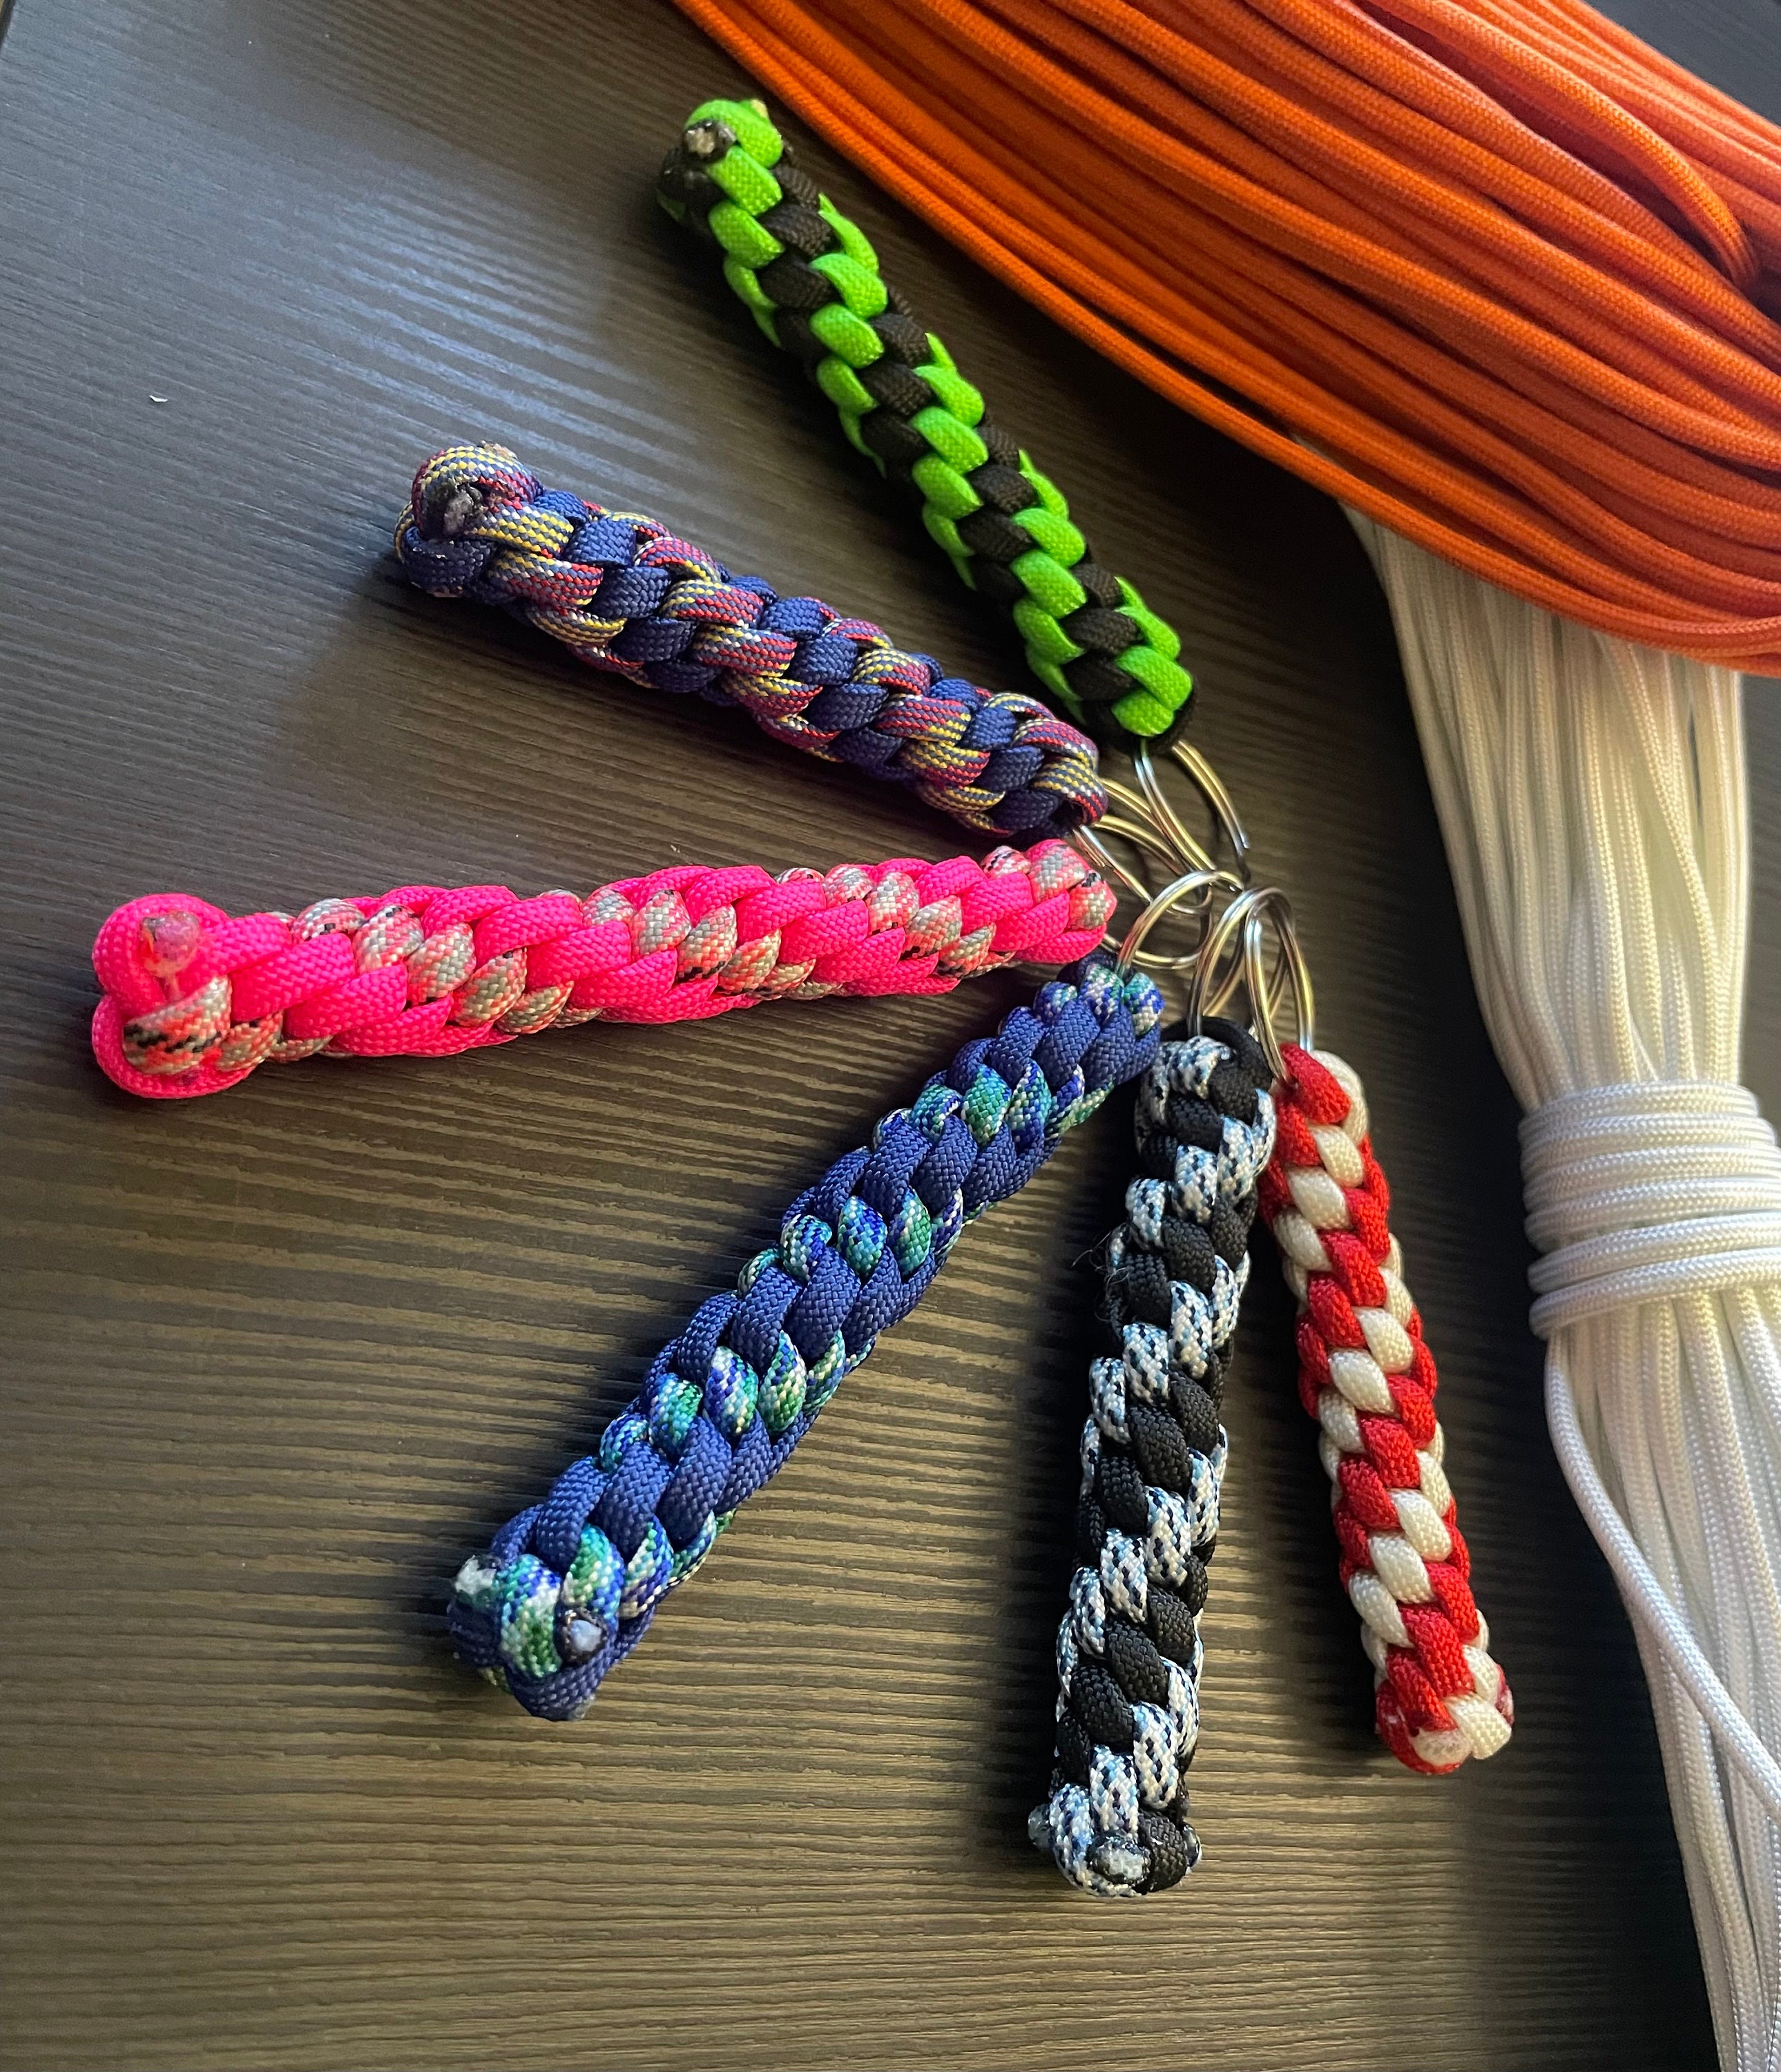 Paracord Lanyard Snake Knot with Clip, Custom handmade badge ID name tag  lanyard with breakaway clasp. Personalized gift.